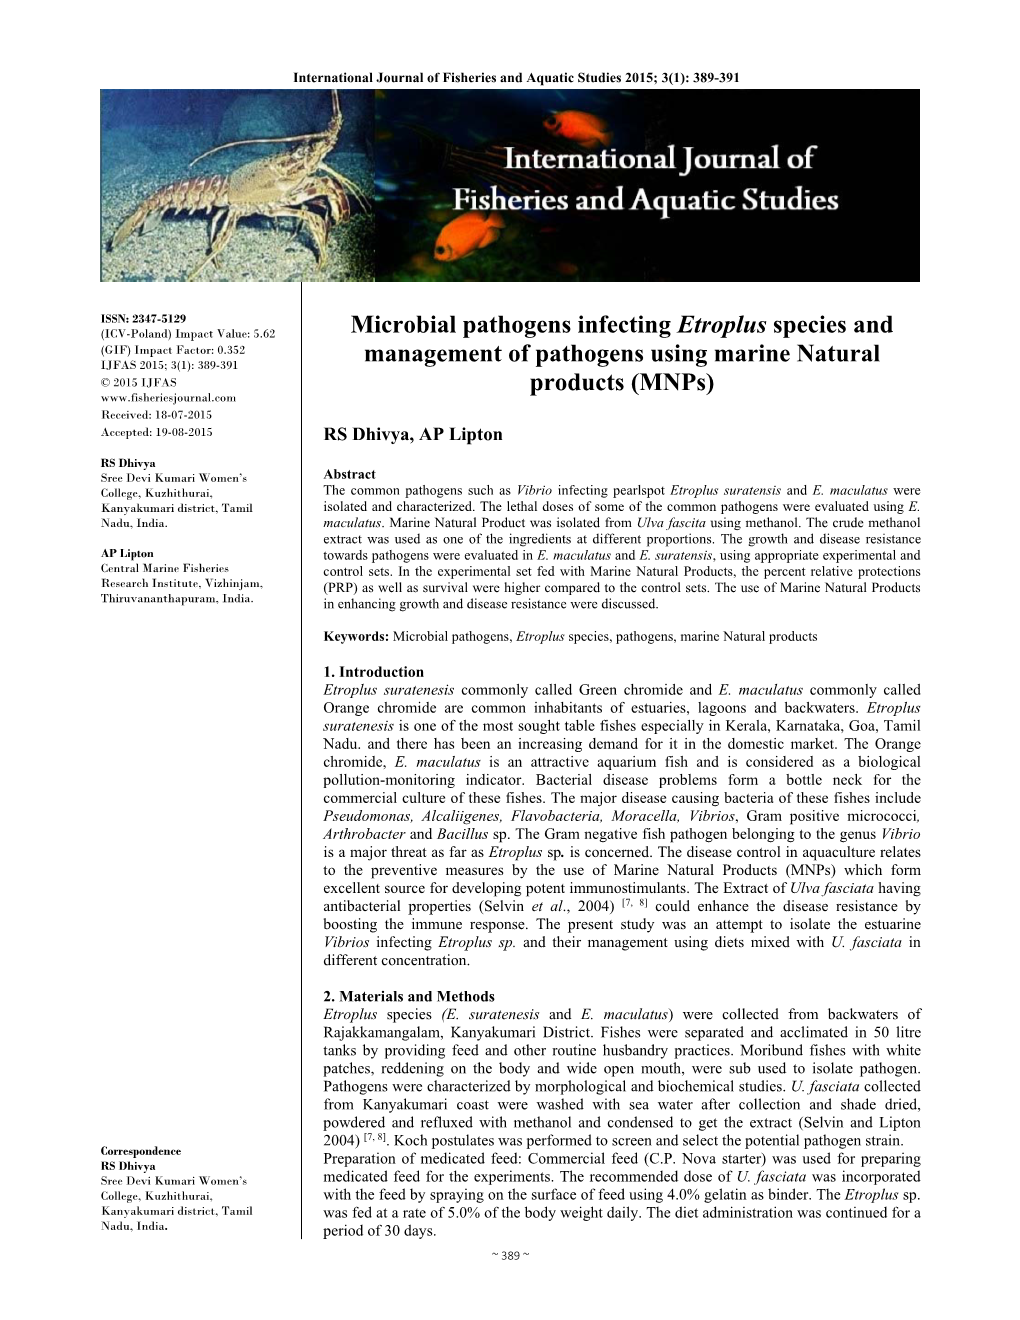 Microbial Pathogens Infecting Etroplus Species and Management of Pathogens Using Marine Natural Products